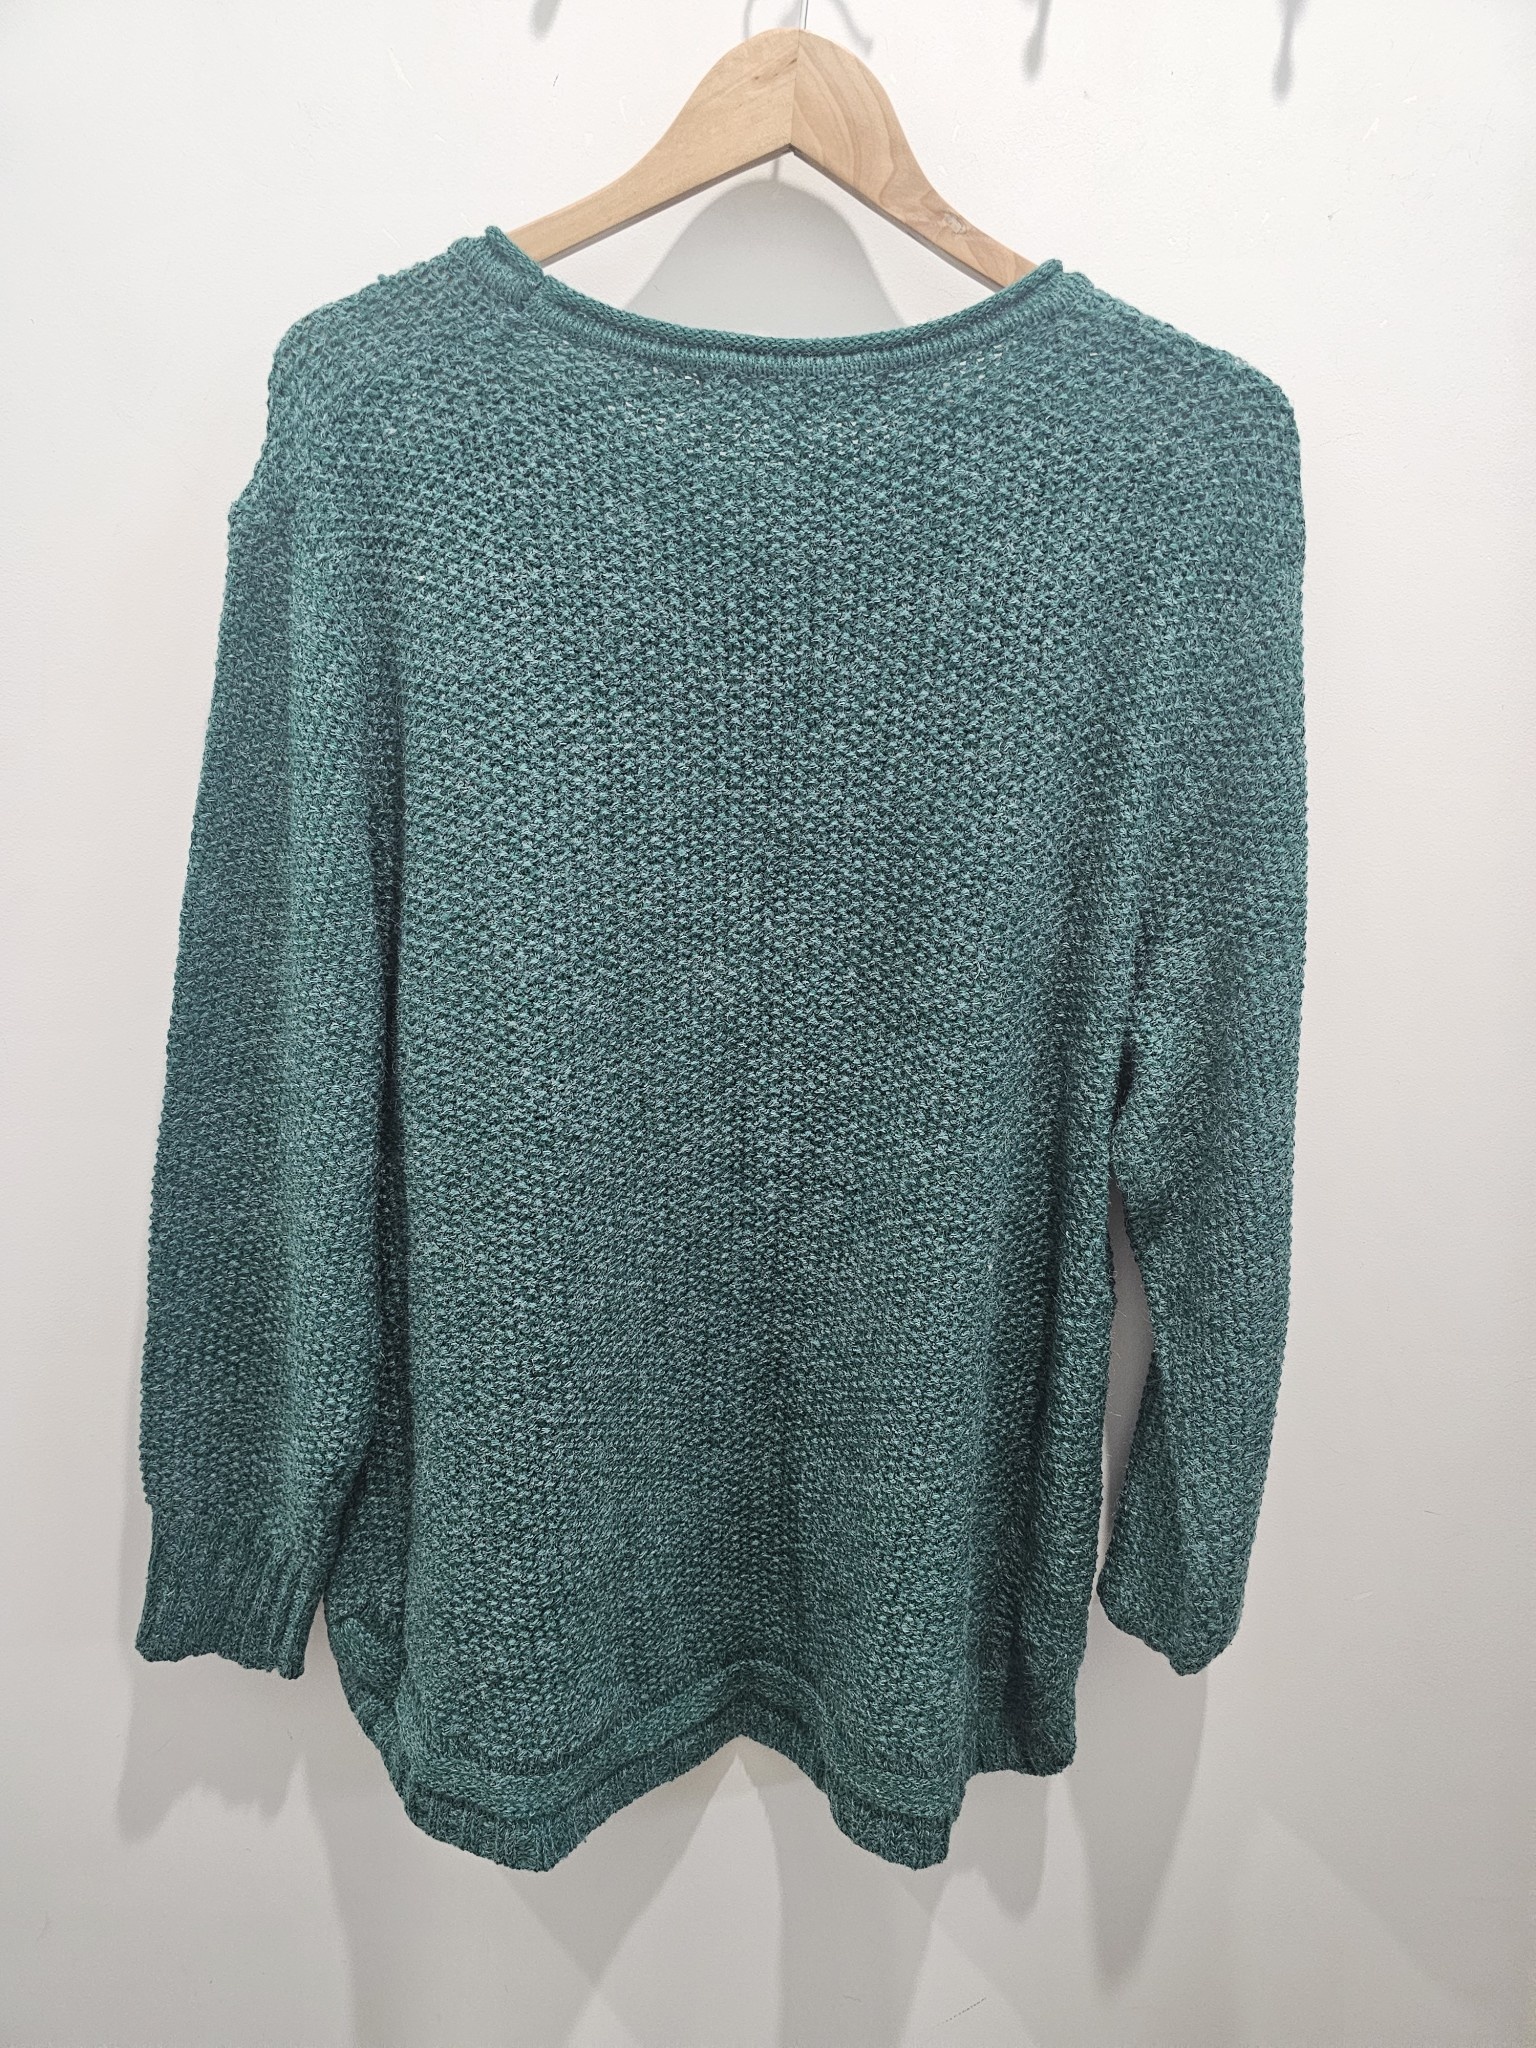 Willow Tree Button Detail Knit Jumper Teal - Size XL